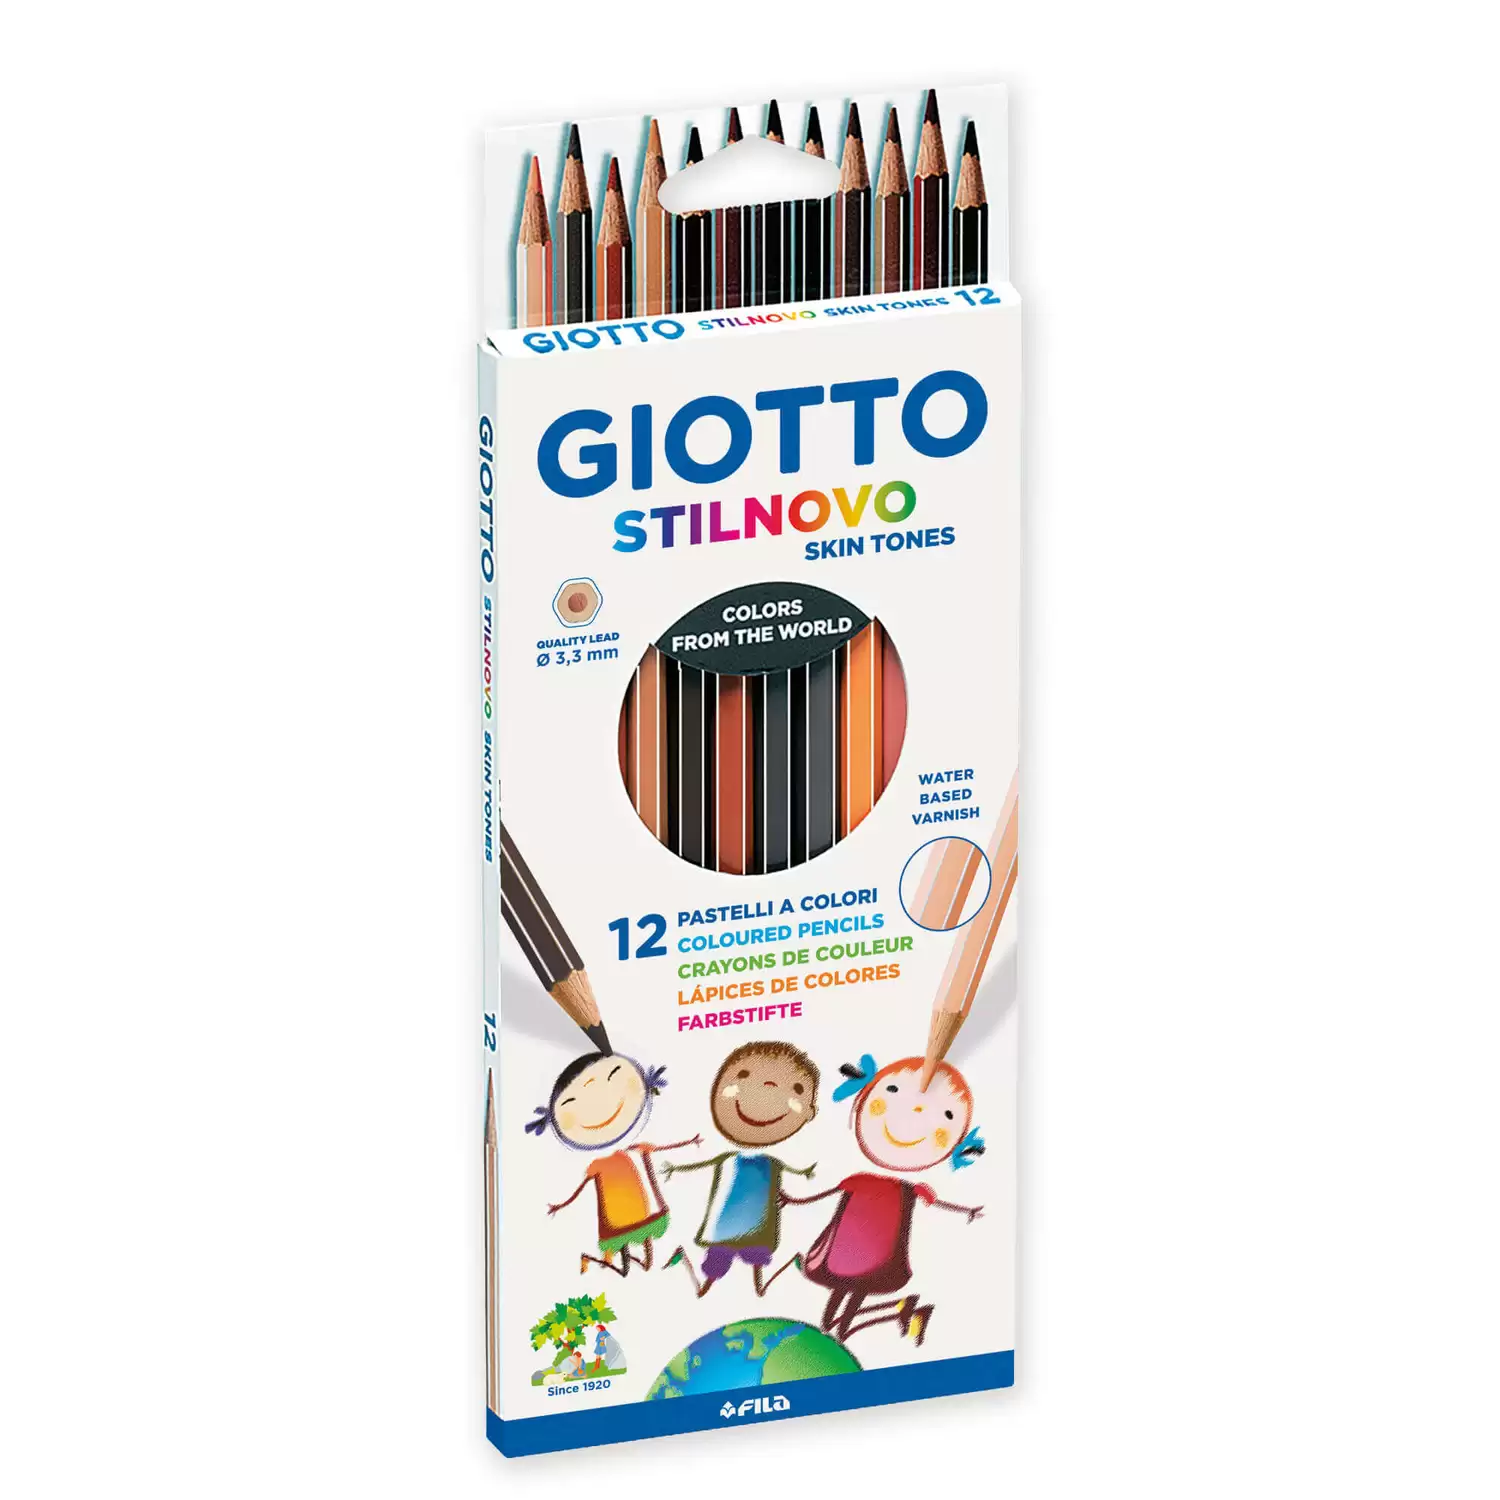 Giotto Skin Tone Colouring Pencils 12 Pack - Gompels - Care & Nursery  Supply Specialists